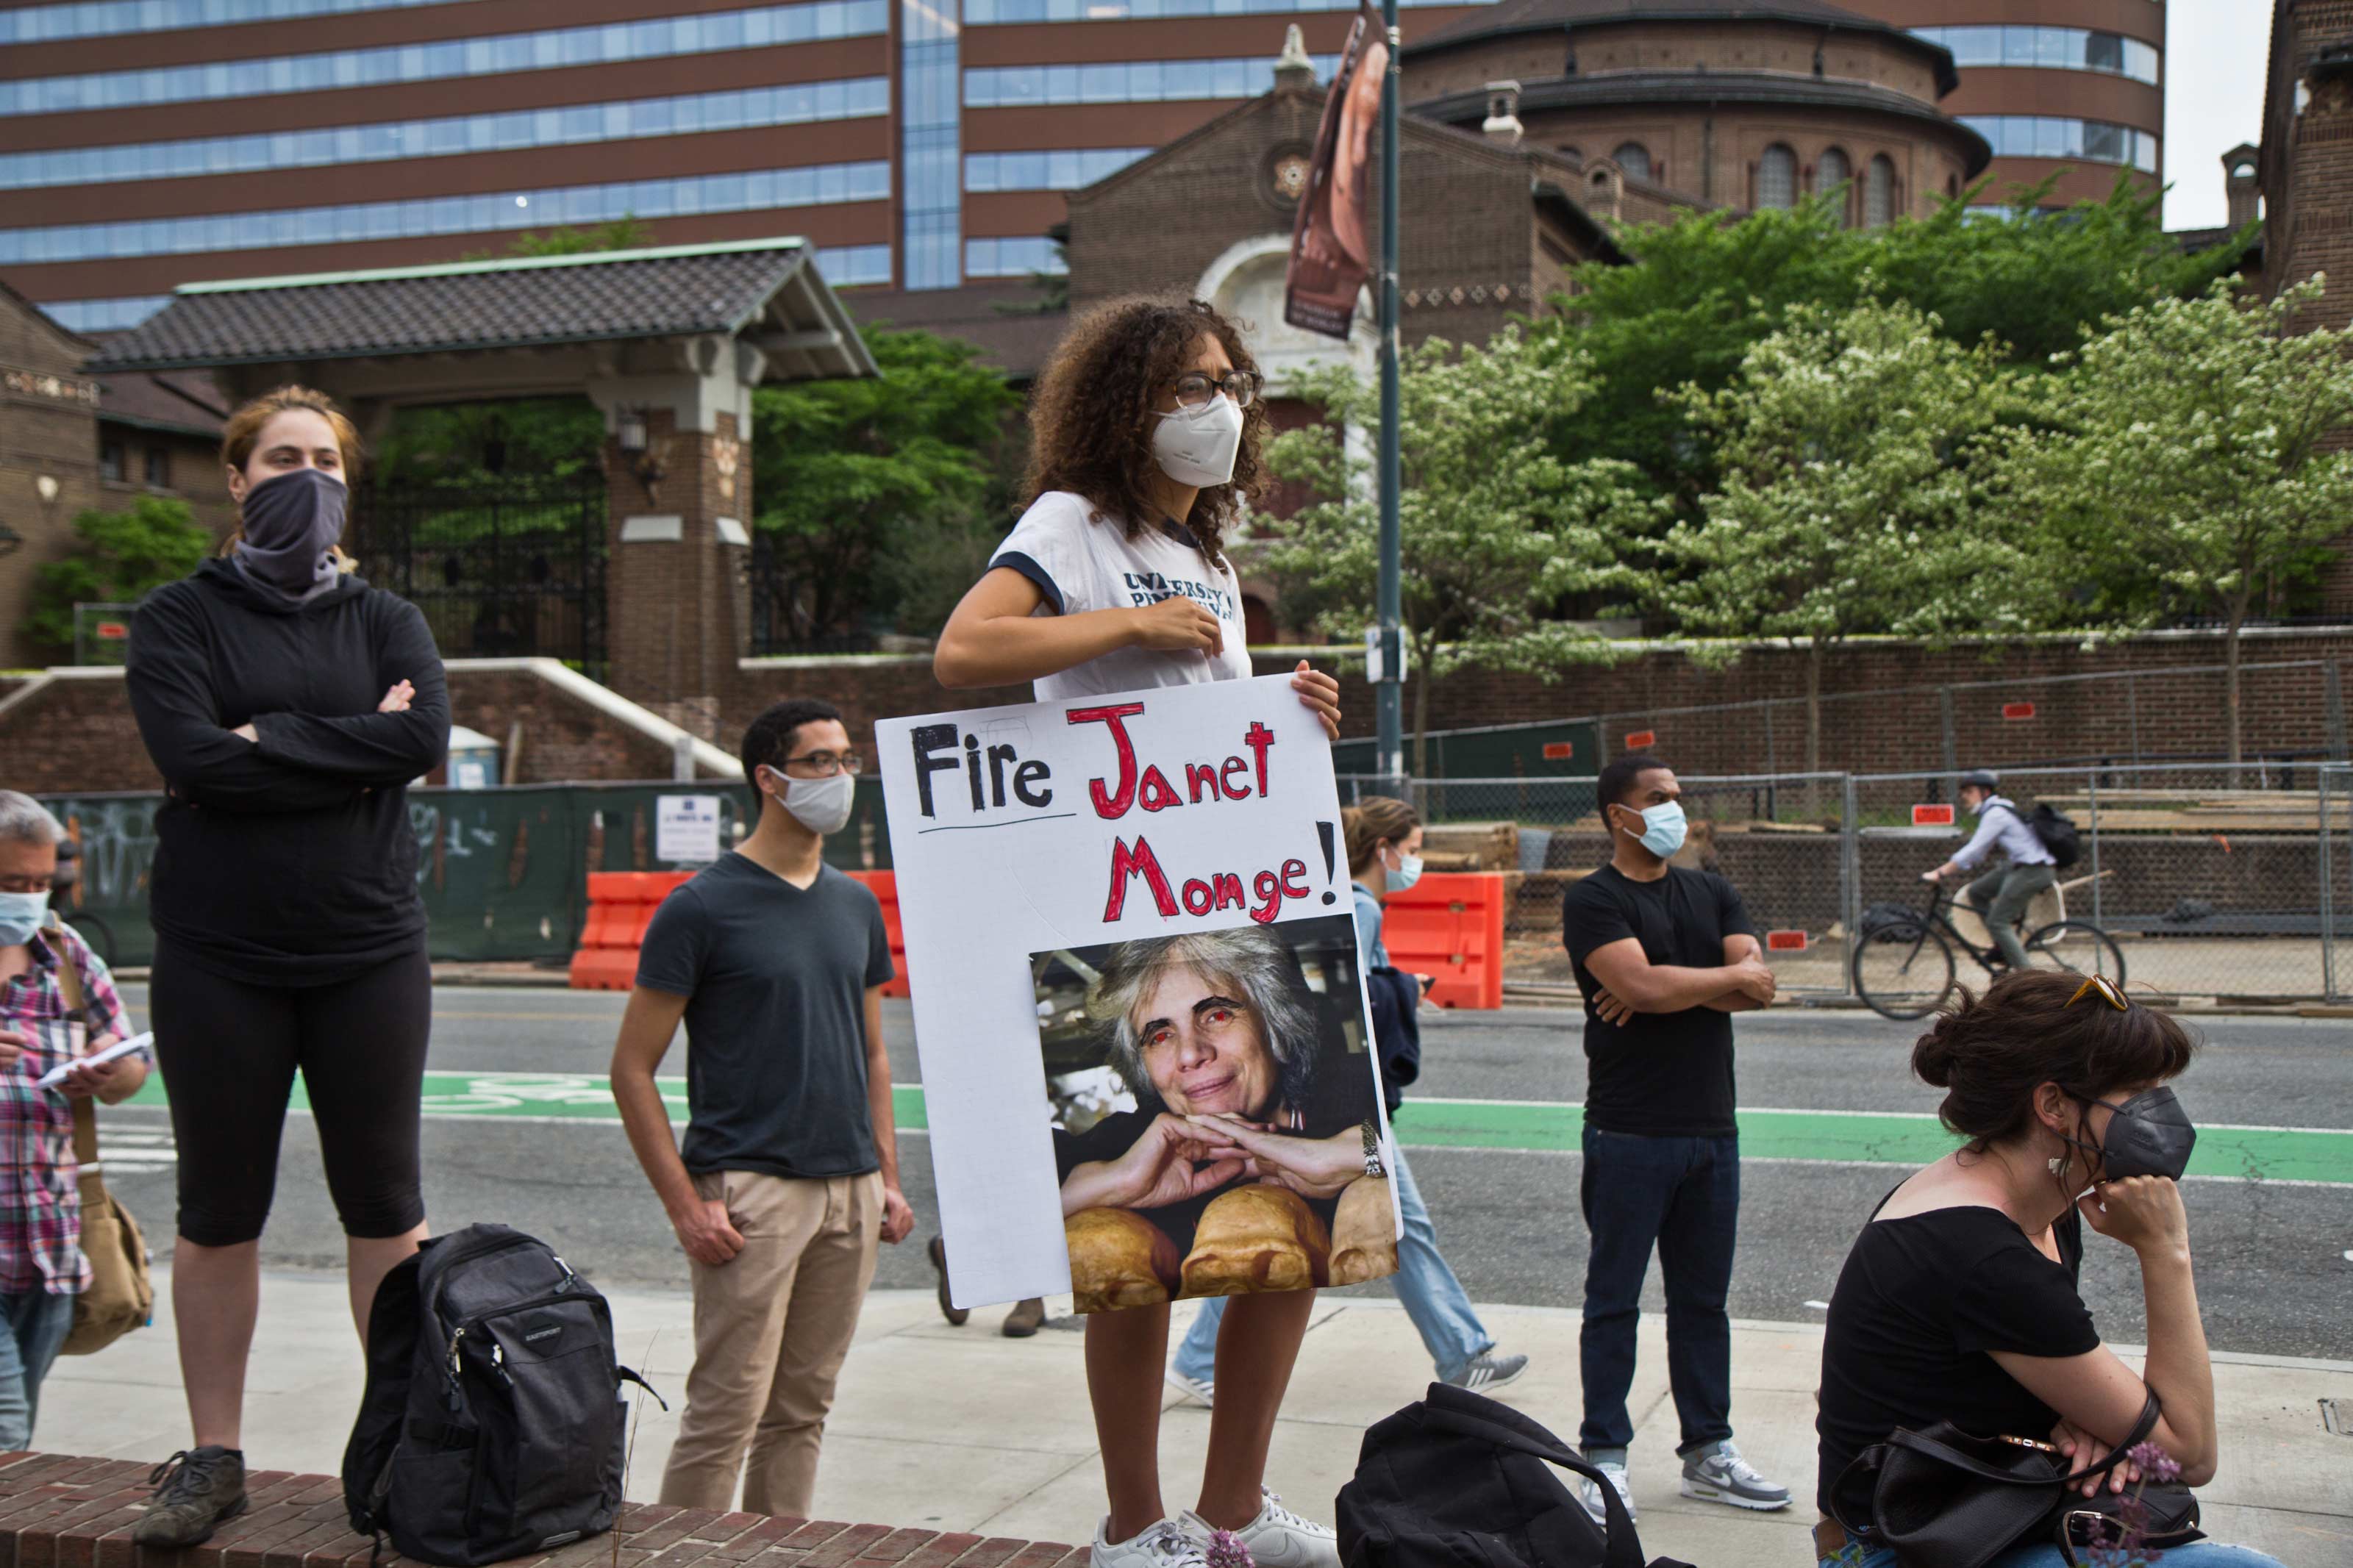 A protester called for the firing of Penn Museum’s Janet Monge, at a protest outside the Penn Museum on April 28, 2021. (Kimberly Paynter/WHYY)